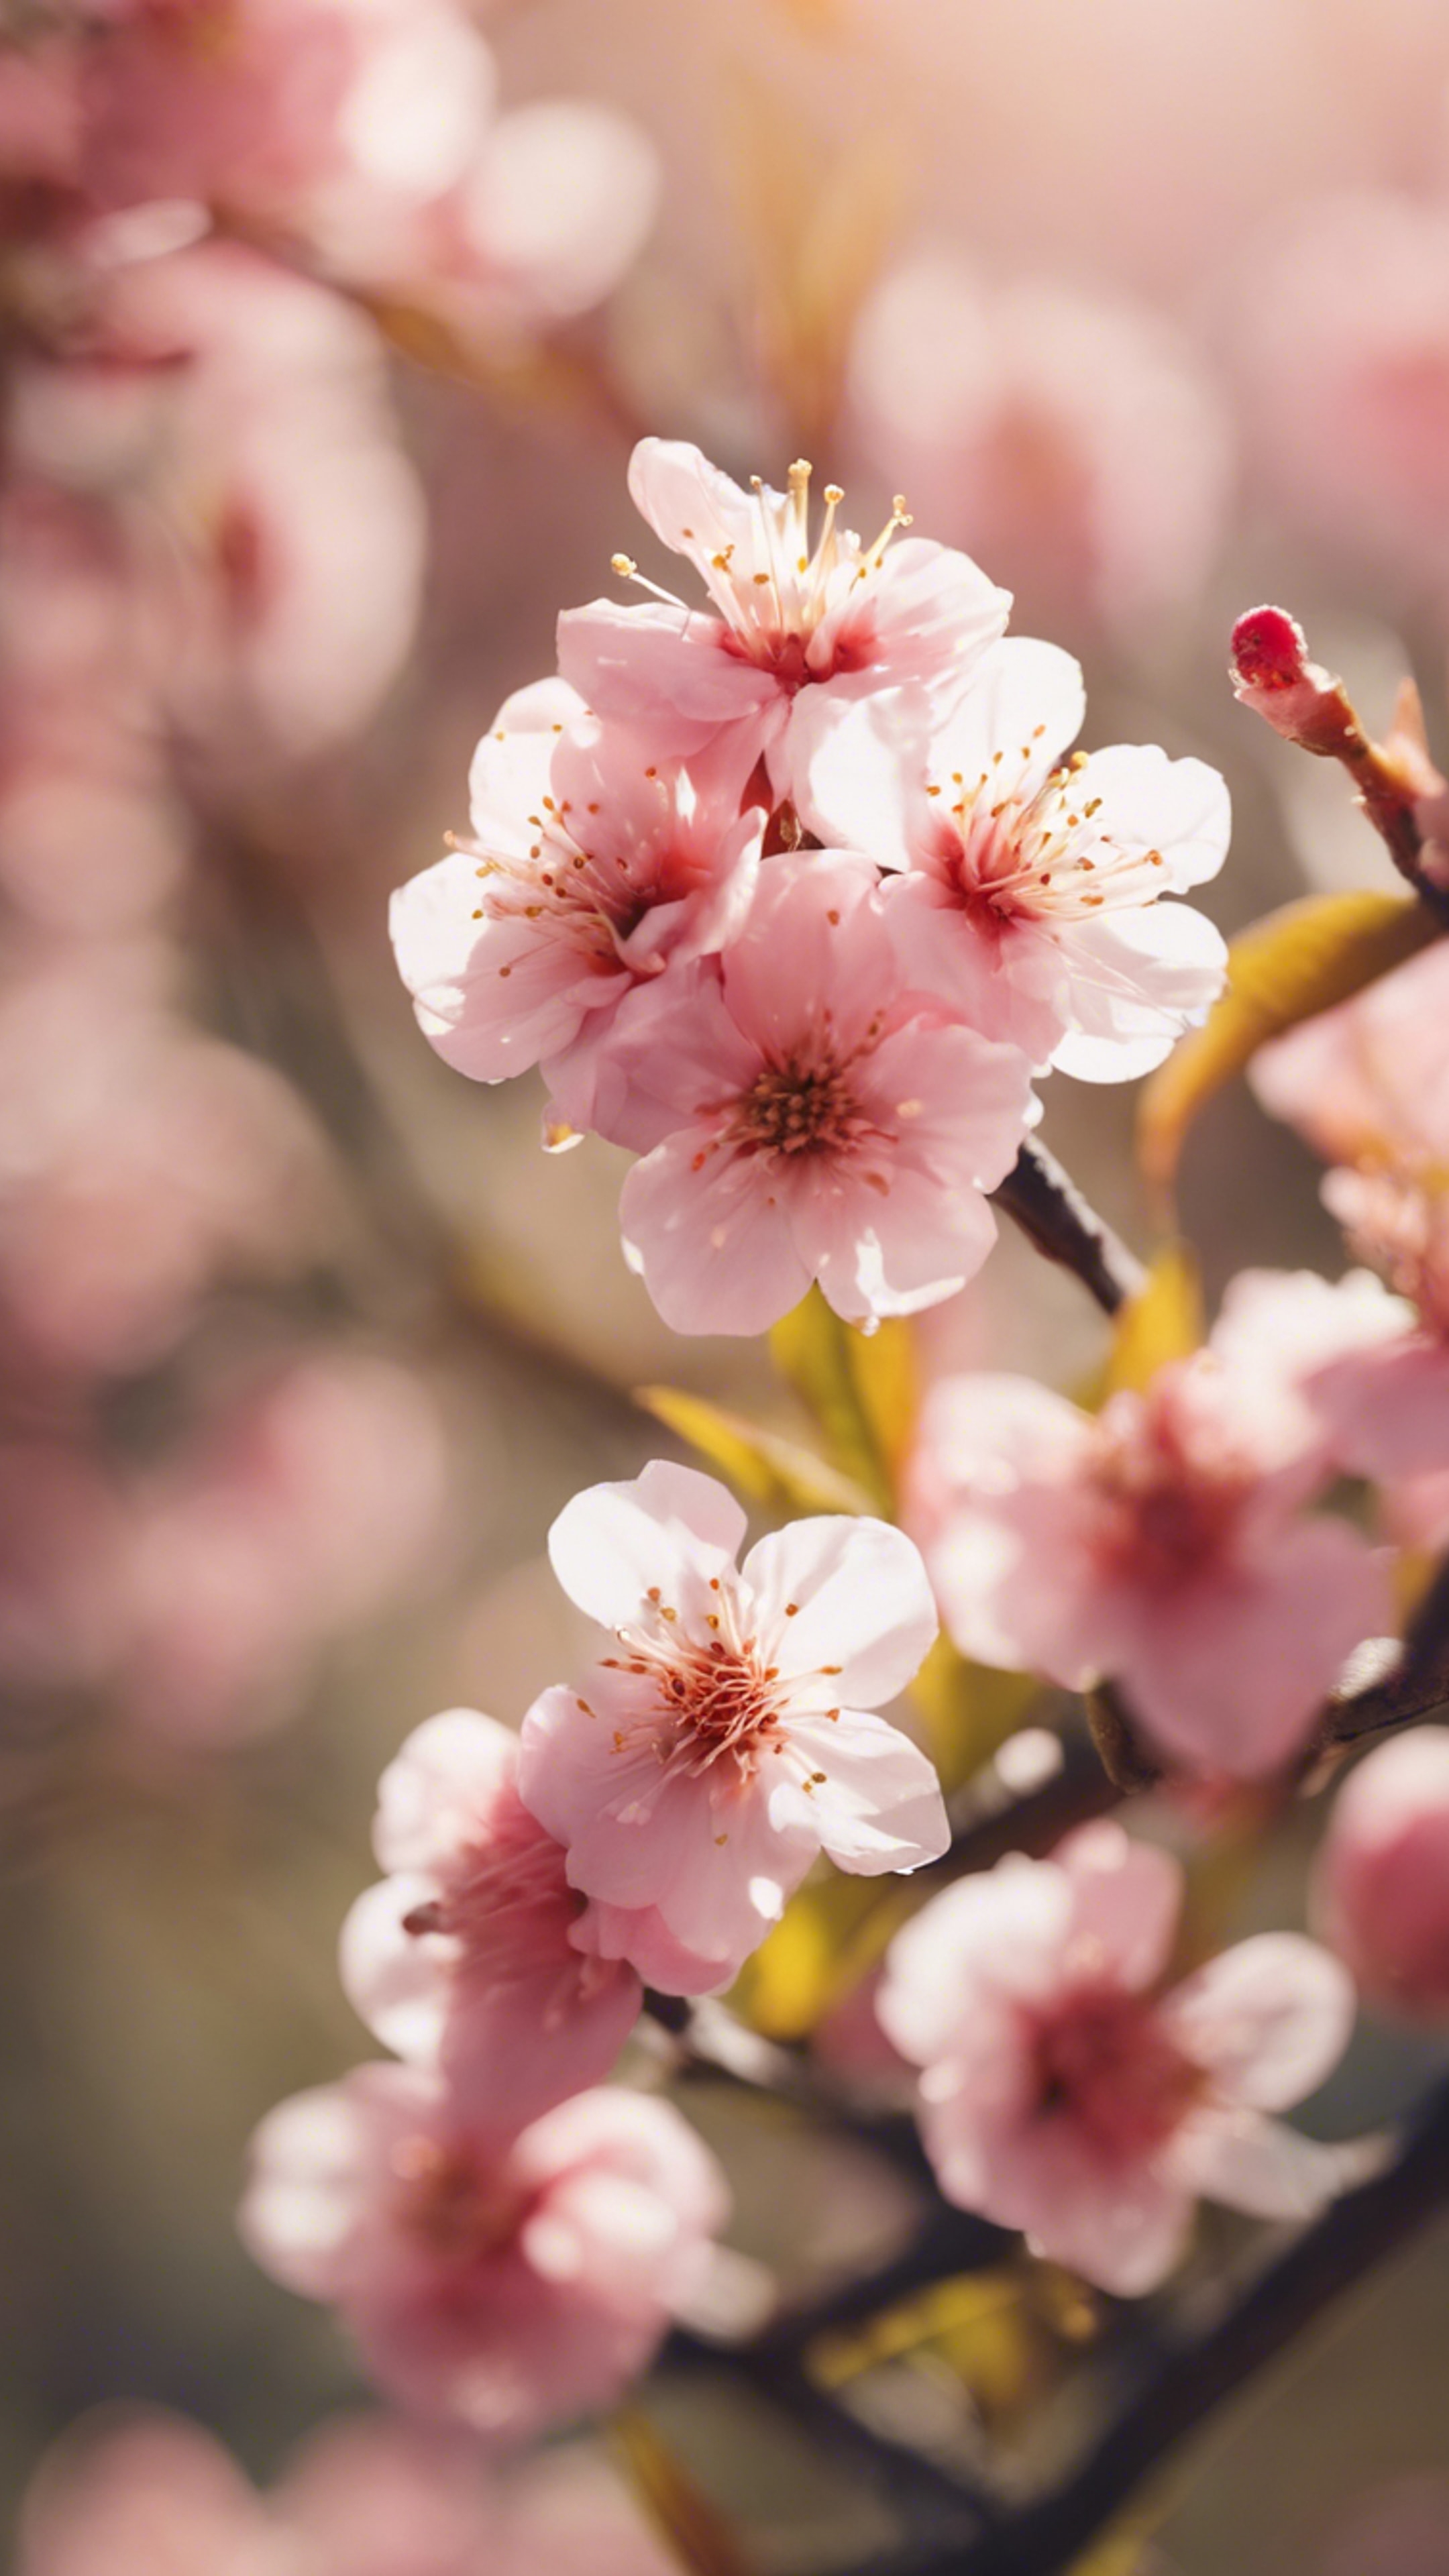 A close-up of happy peach flowers blooming cheerfully on a sunny spring day. Tapeta[9ab03d009b524efe8bfb]